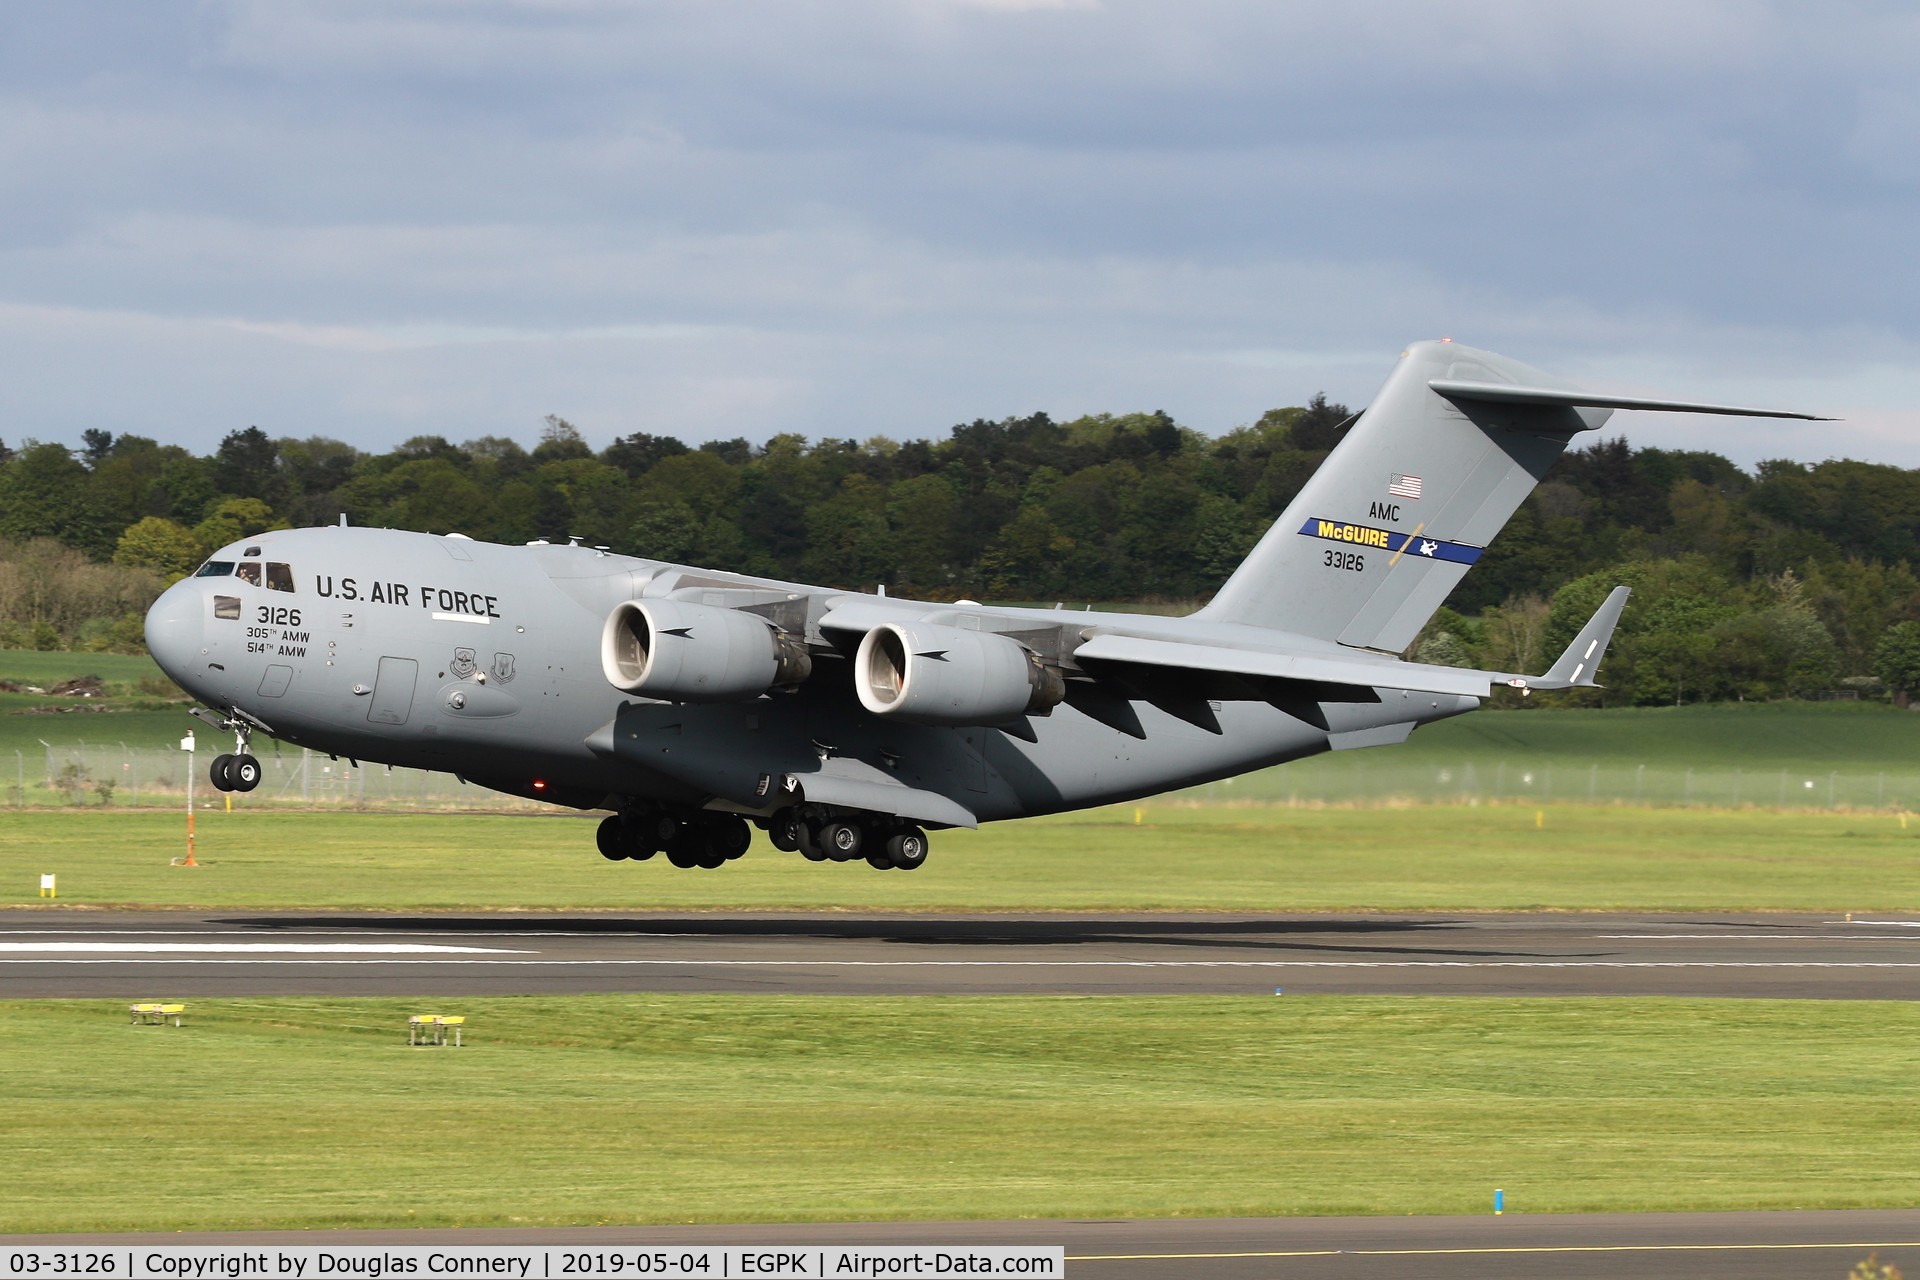 03-3126, 2003 Boeing C-17A Globemaster III C/N P-126, On finals for runway 30 at Prestwick C/S RCH784